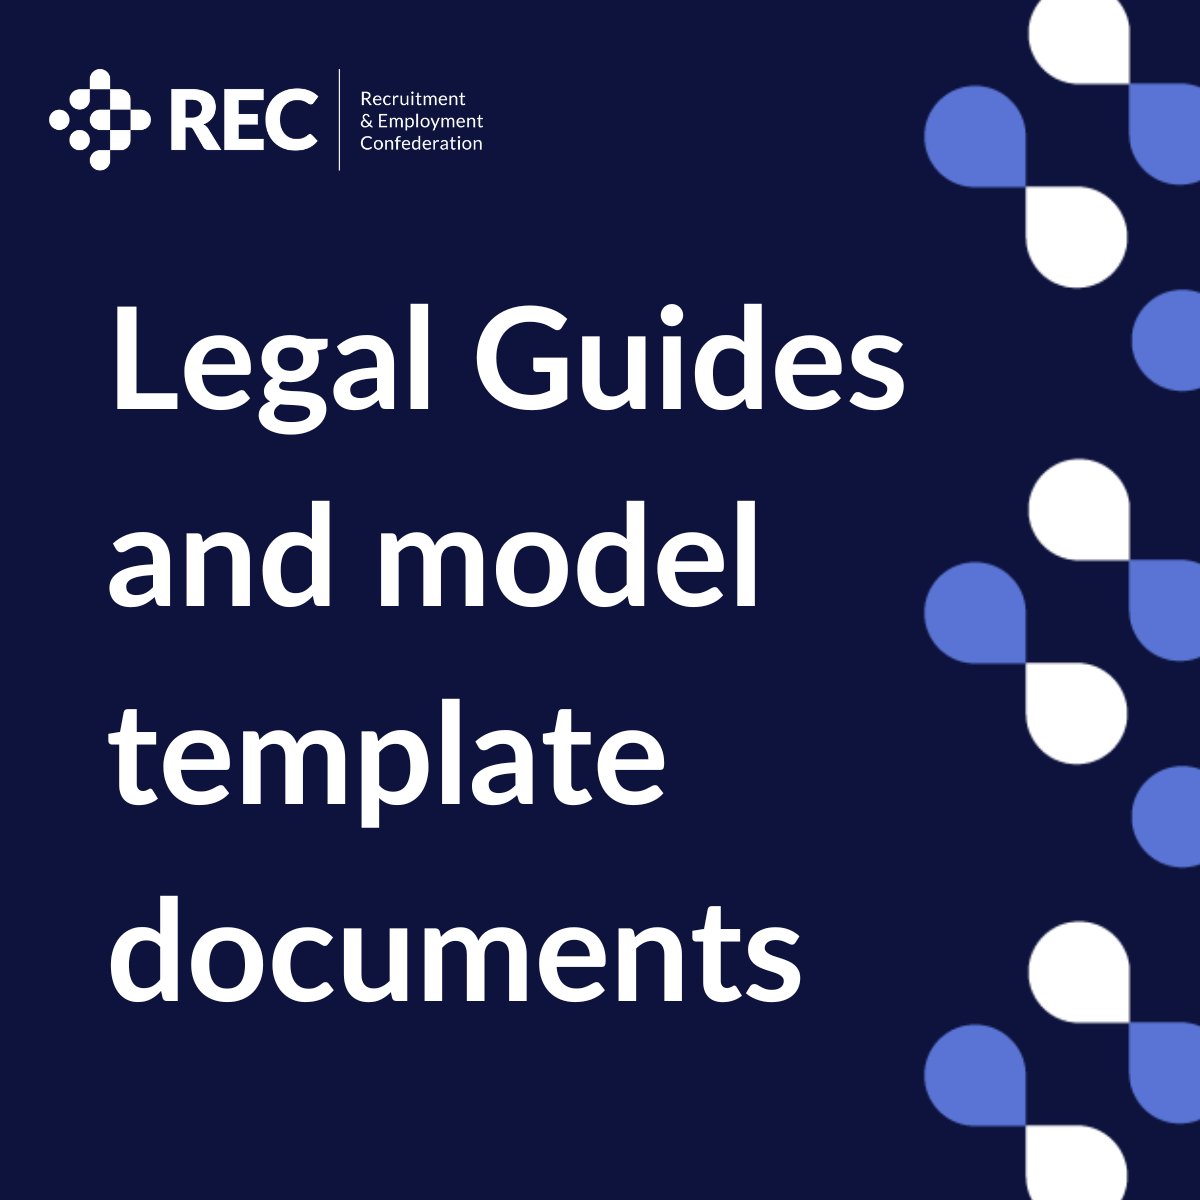 Check out our latest legal resources including flexible working legal guide bit.ly/4az2xcC and checklist & letters bit.ly/3U1EPyq. Paternity leave legal guide bit.ly/3xDUXyU and model policy template document bit.ly/43XqkAy